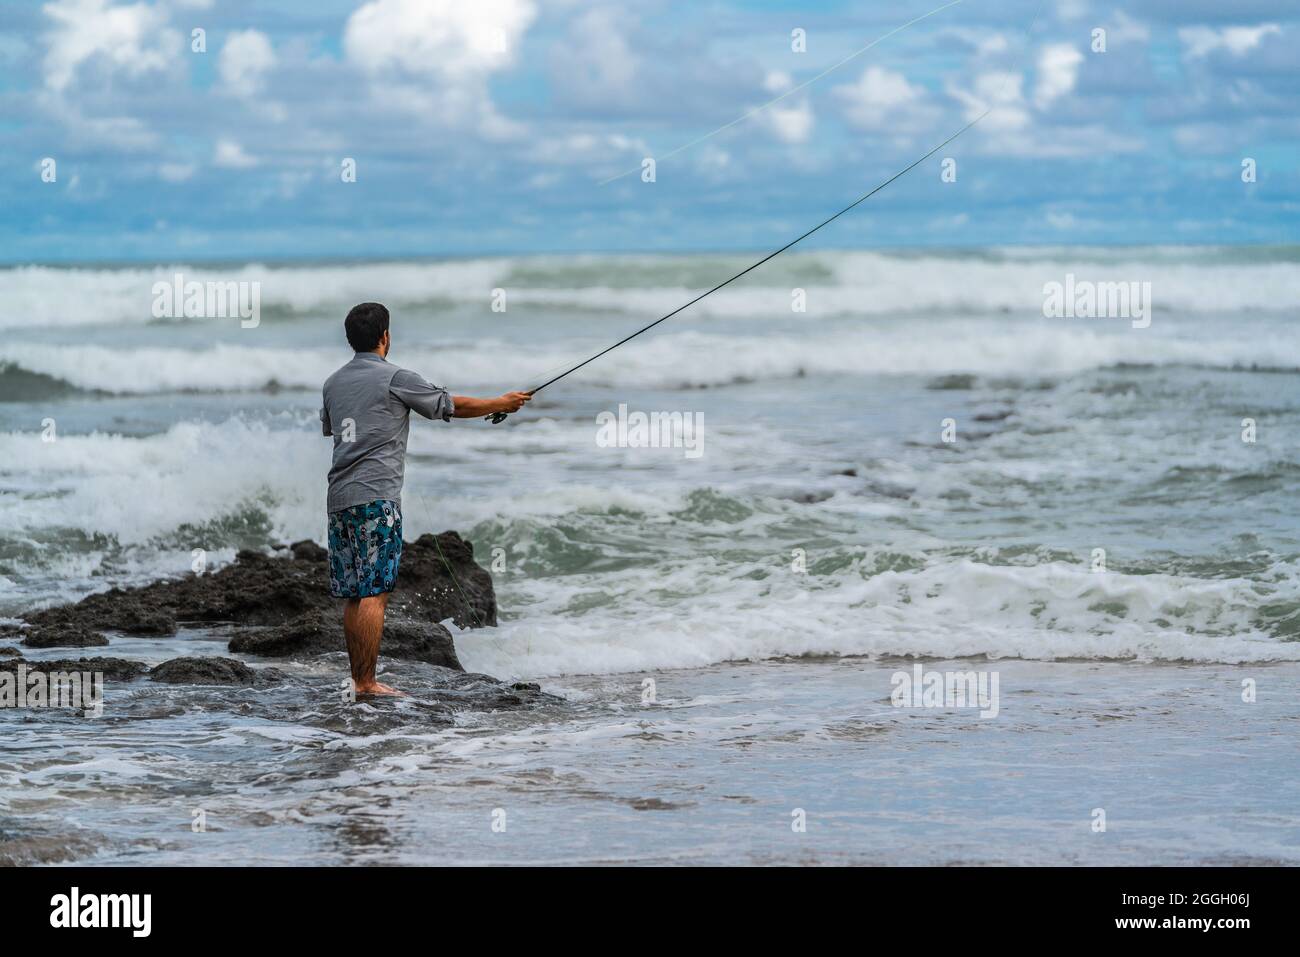 A Costa Rican man wearing a t-shirt and blue shorts is fly fishing at the  beautiful Pacific Coast of Costa Rica. Dramatic cloudy sky on the  background Stock Photo - Alamy